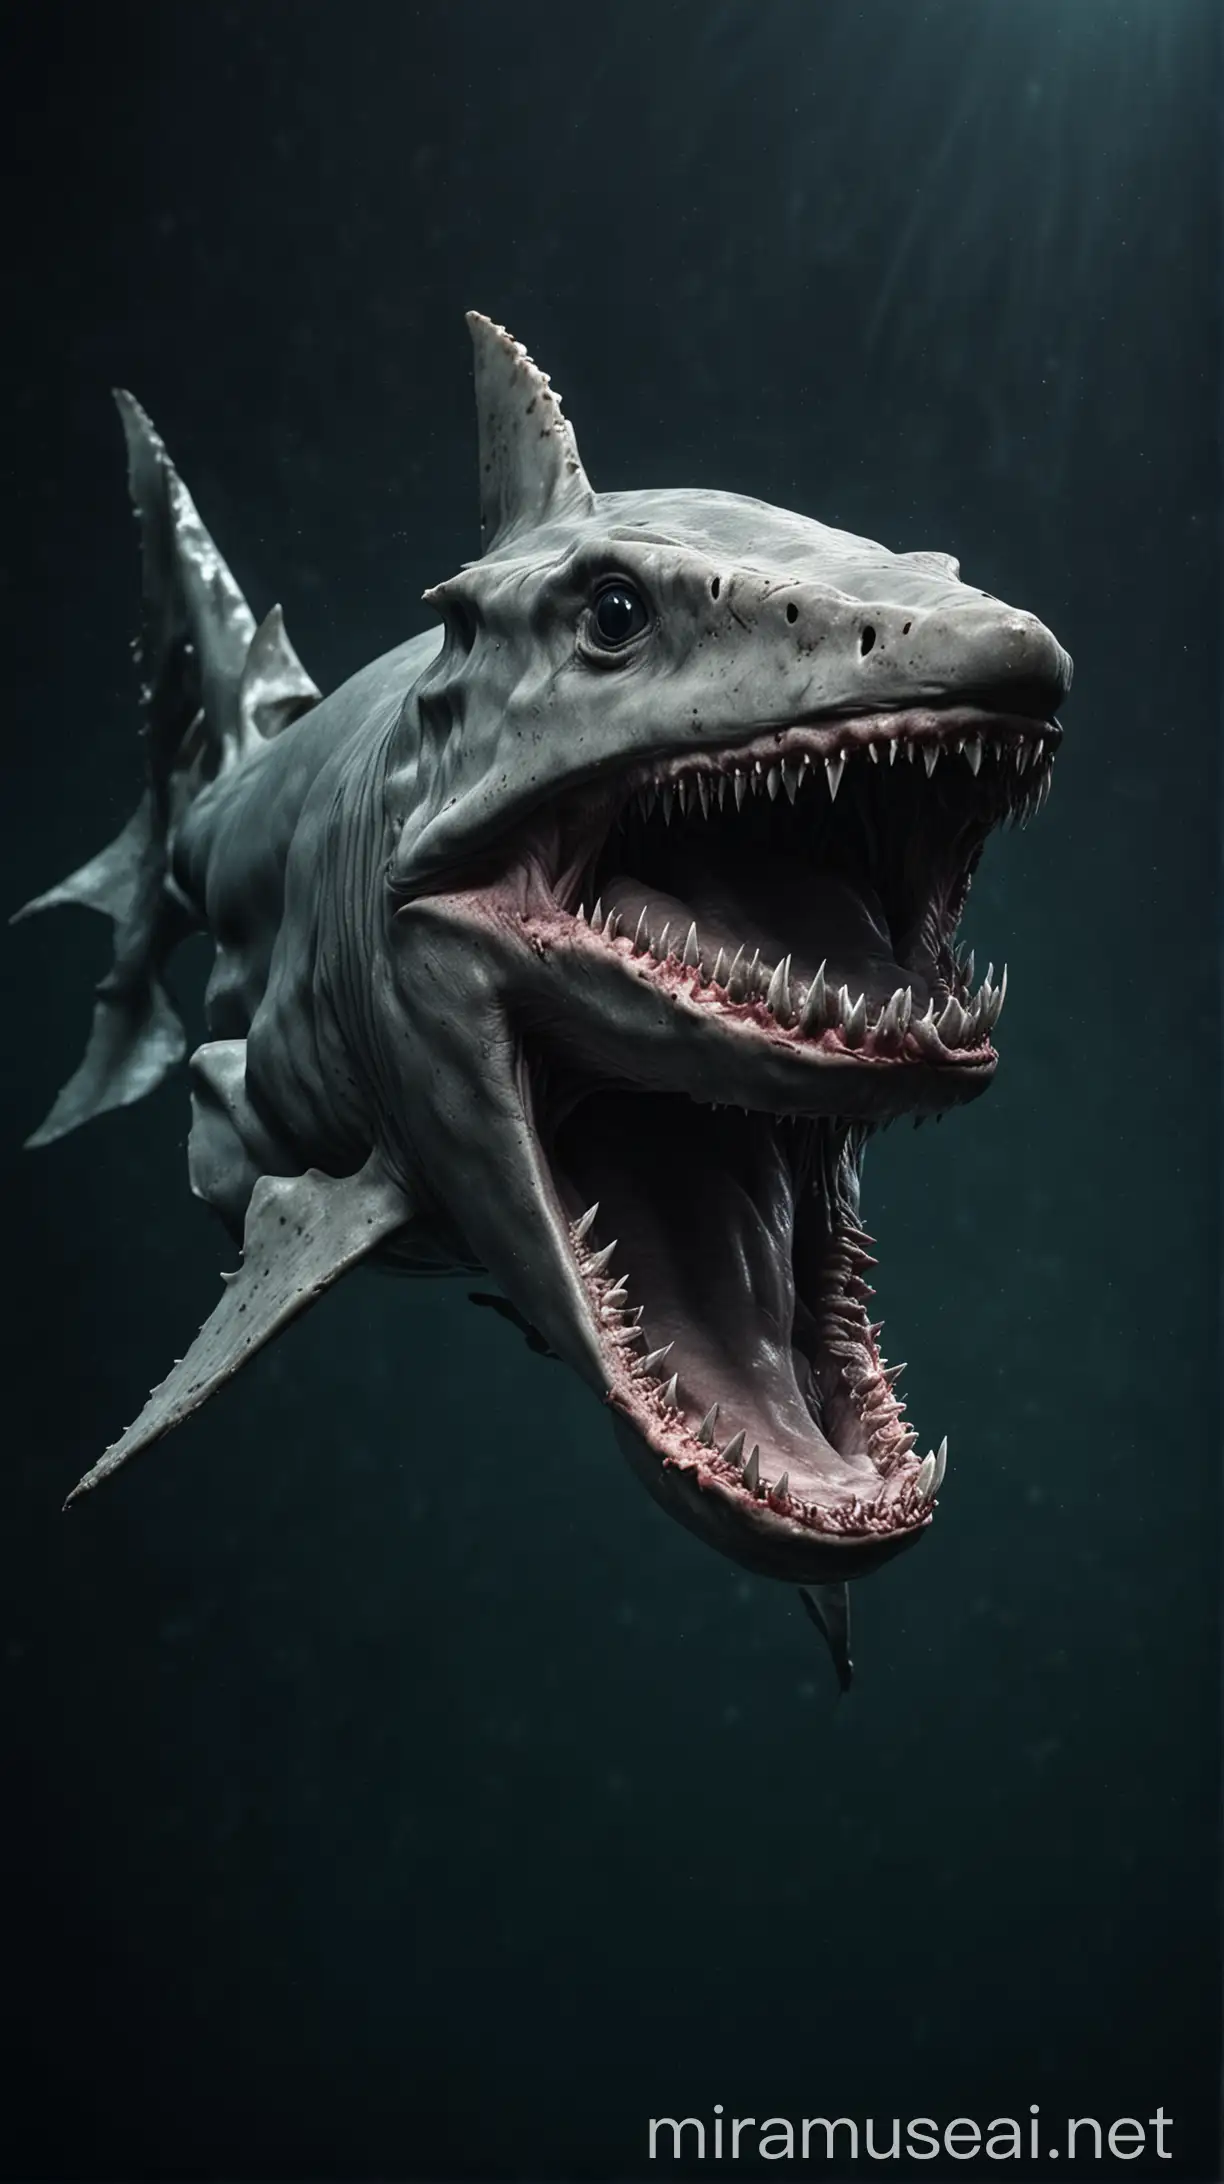 goblin shark with extended jaw in the depths of the ocean. Make it look real 